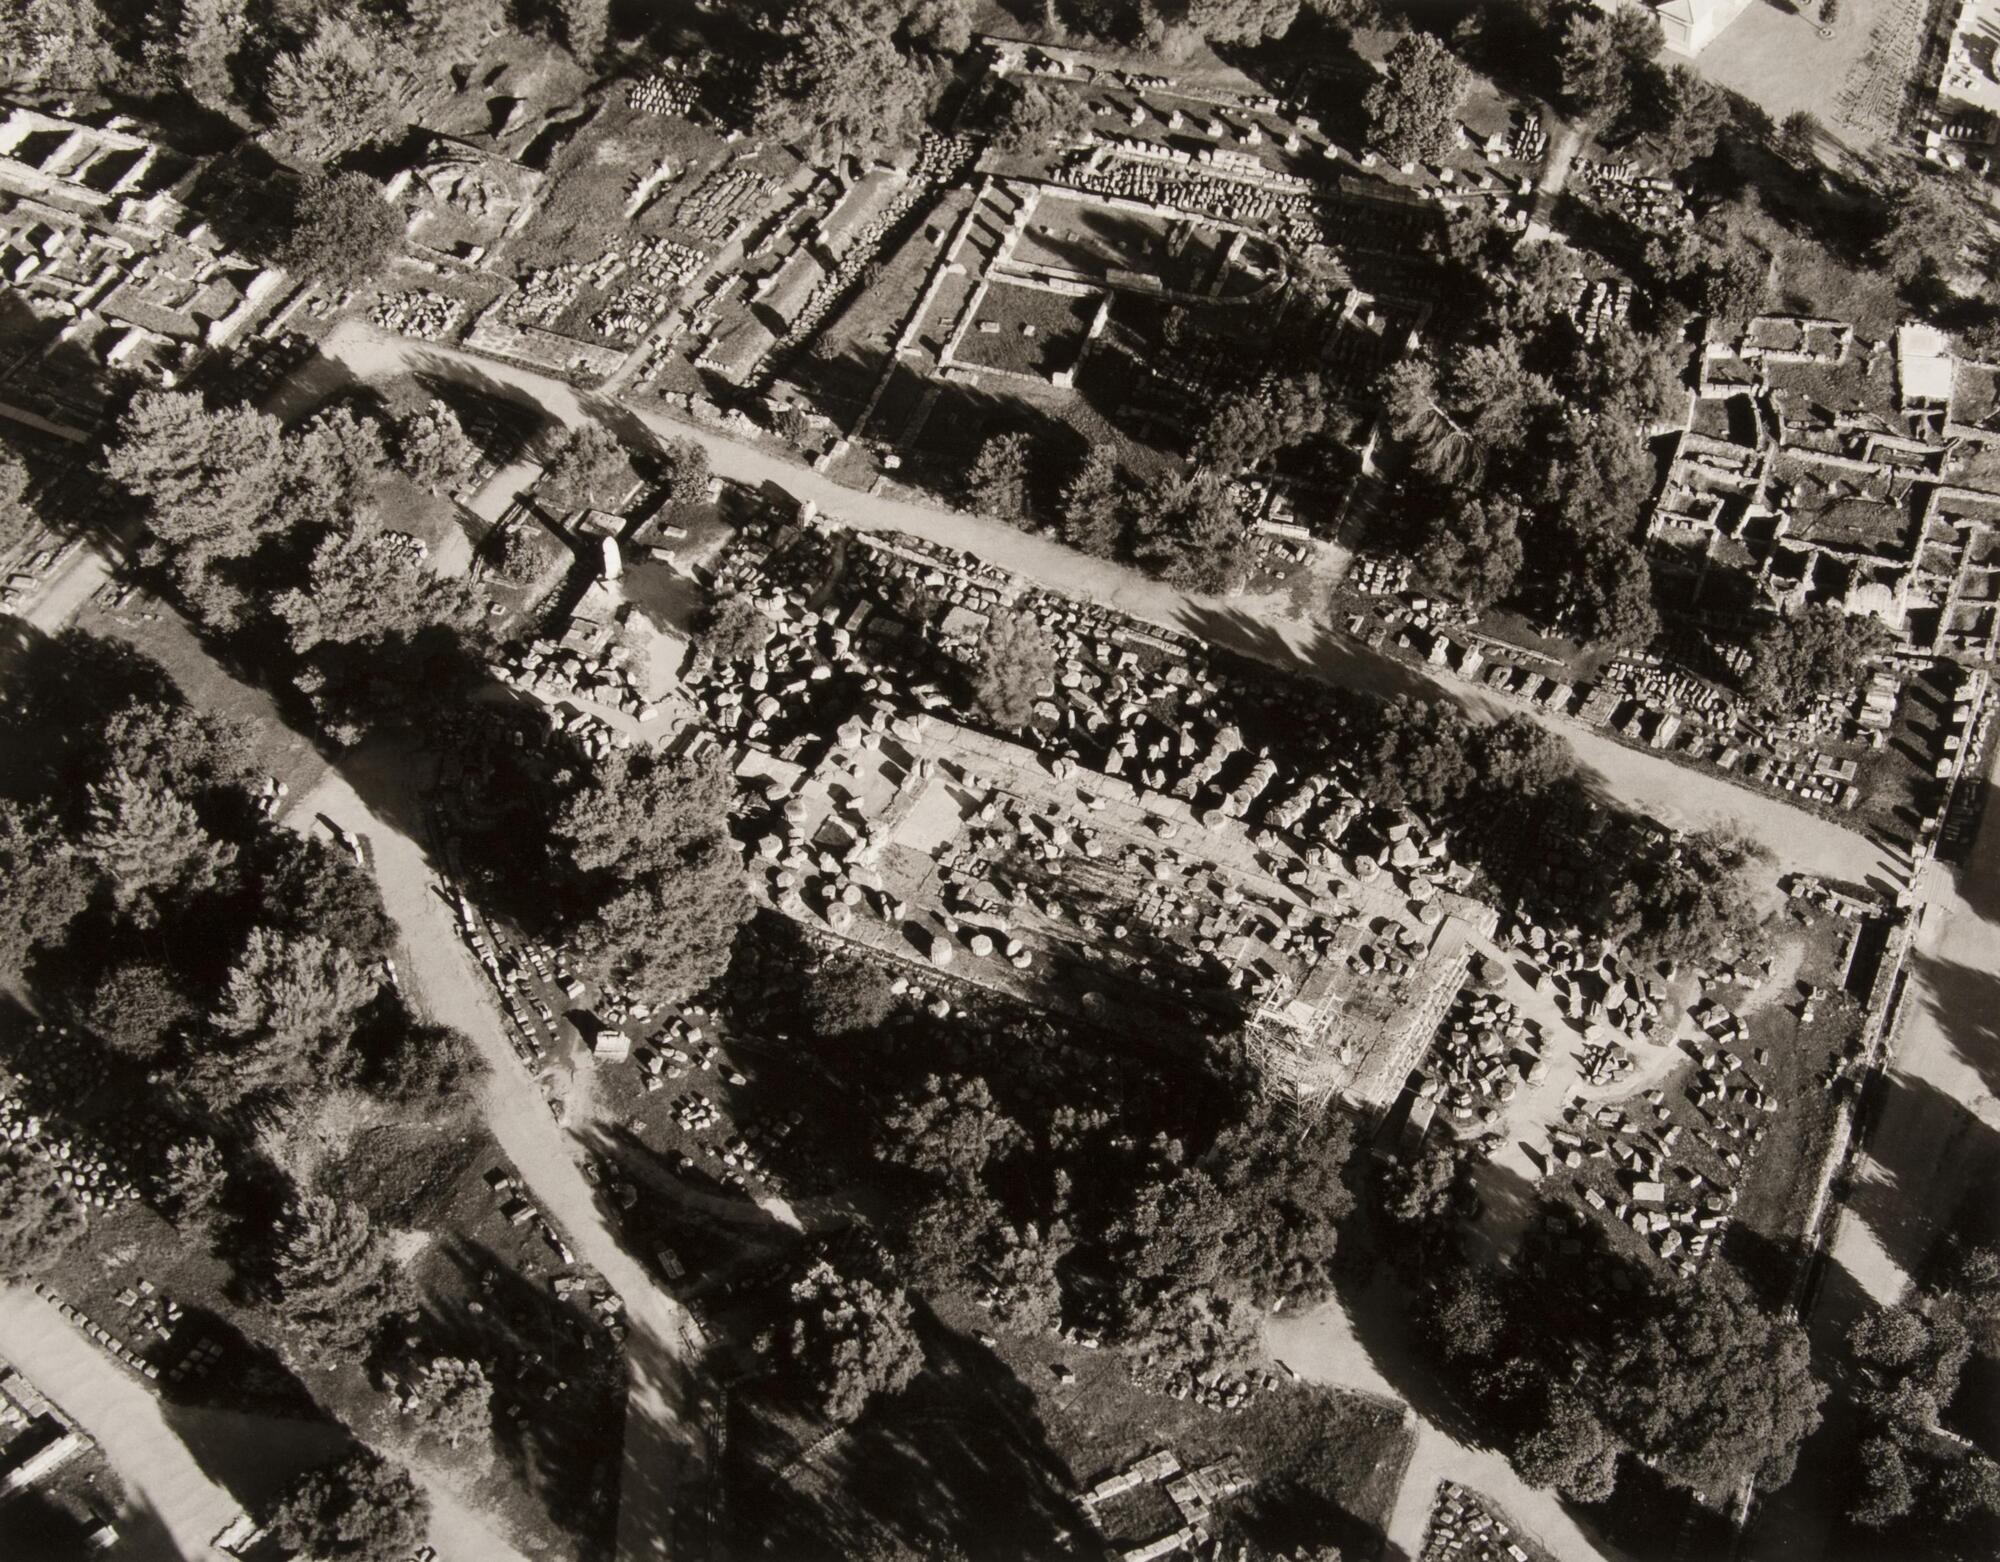 This photograph depicts an aerial view of ancient ruins.